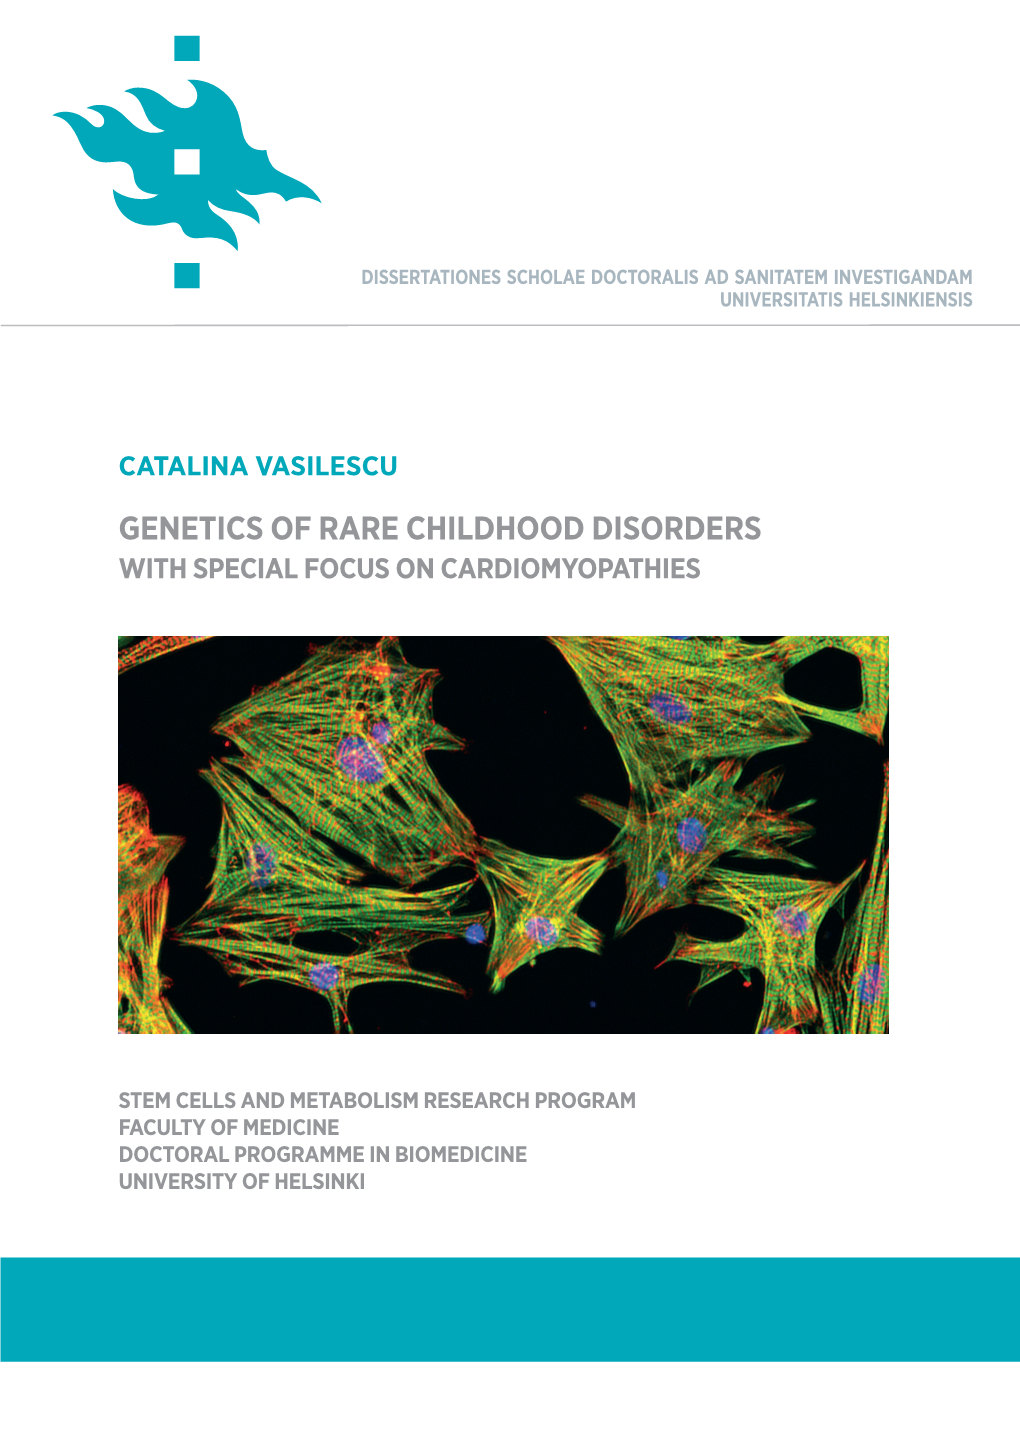 Genetics of Rare Childhood Disorders: with Special Focus on Cardiomyopathies 86/2020 Online)